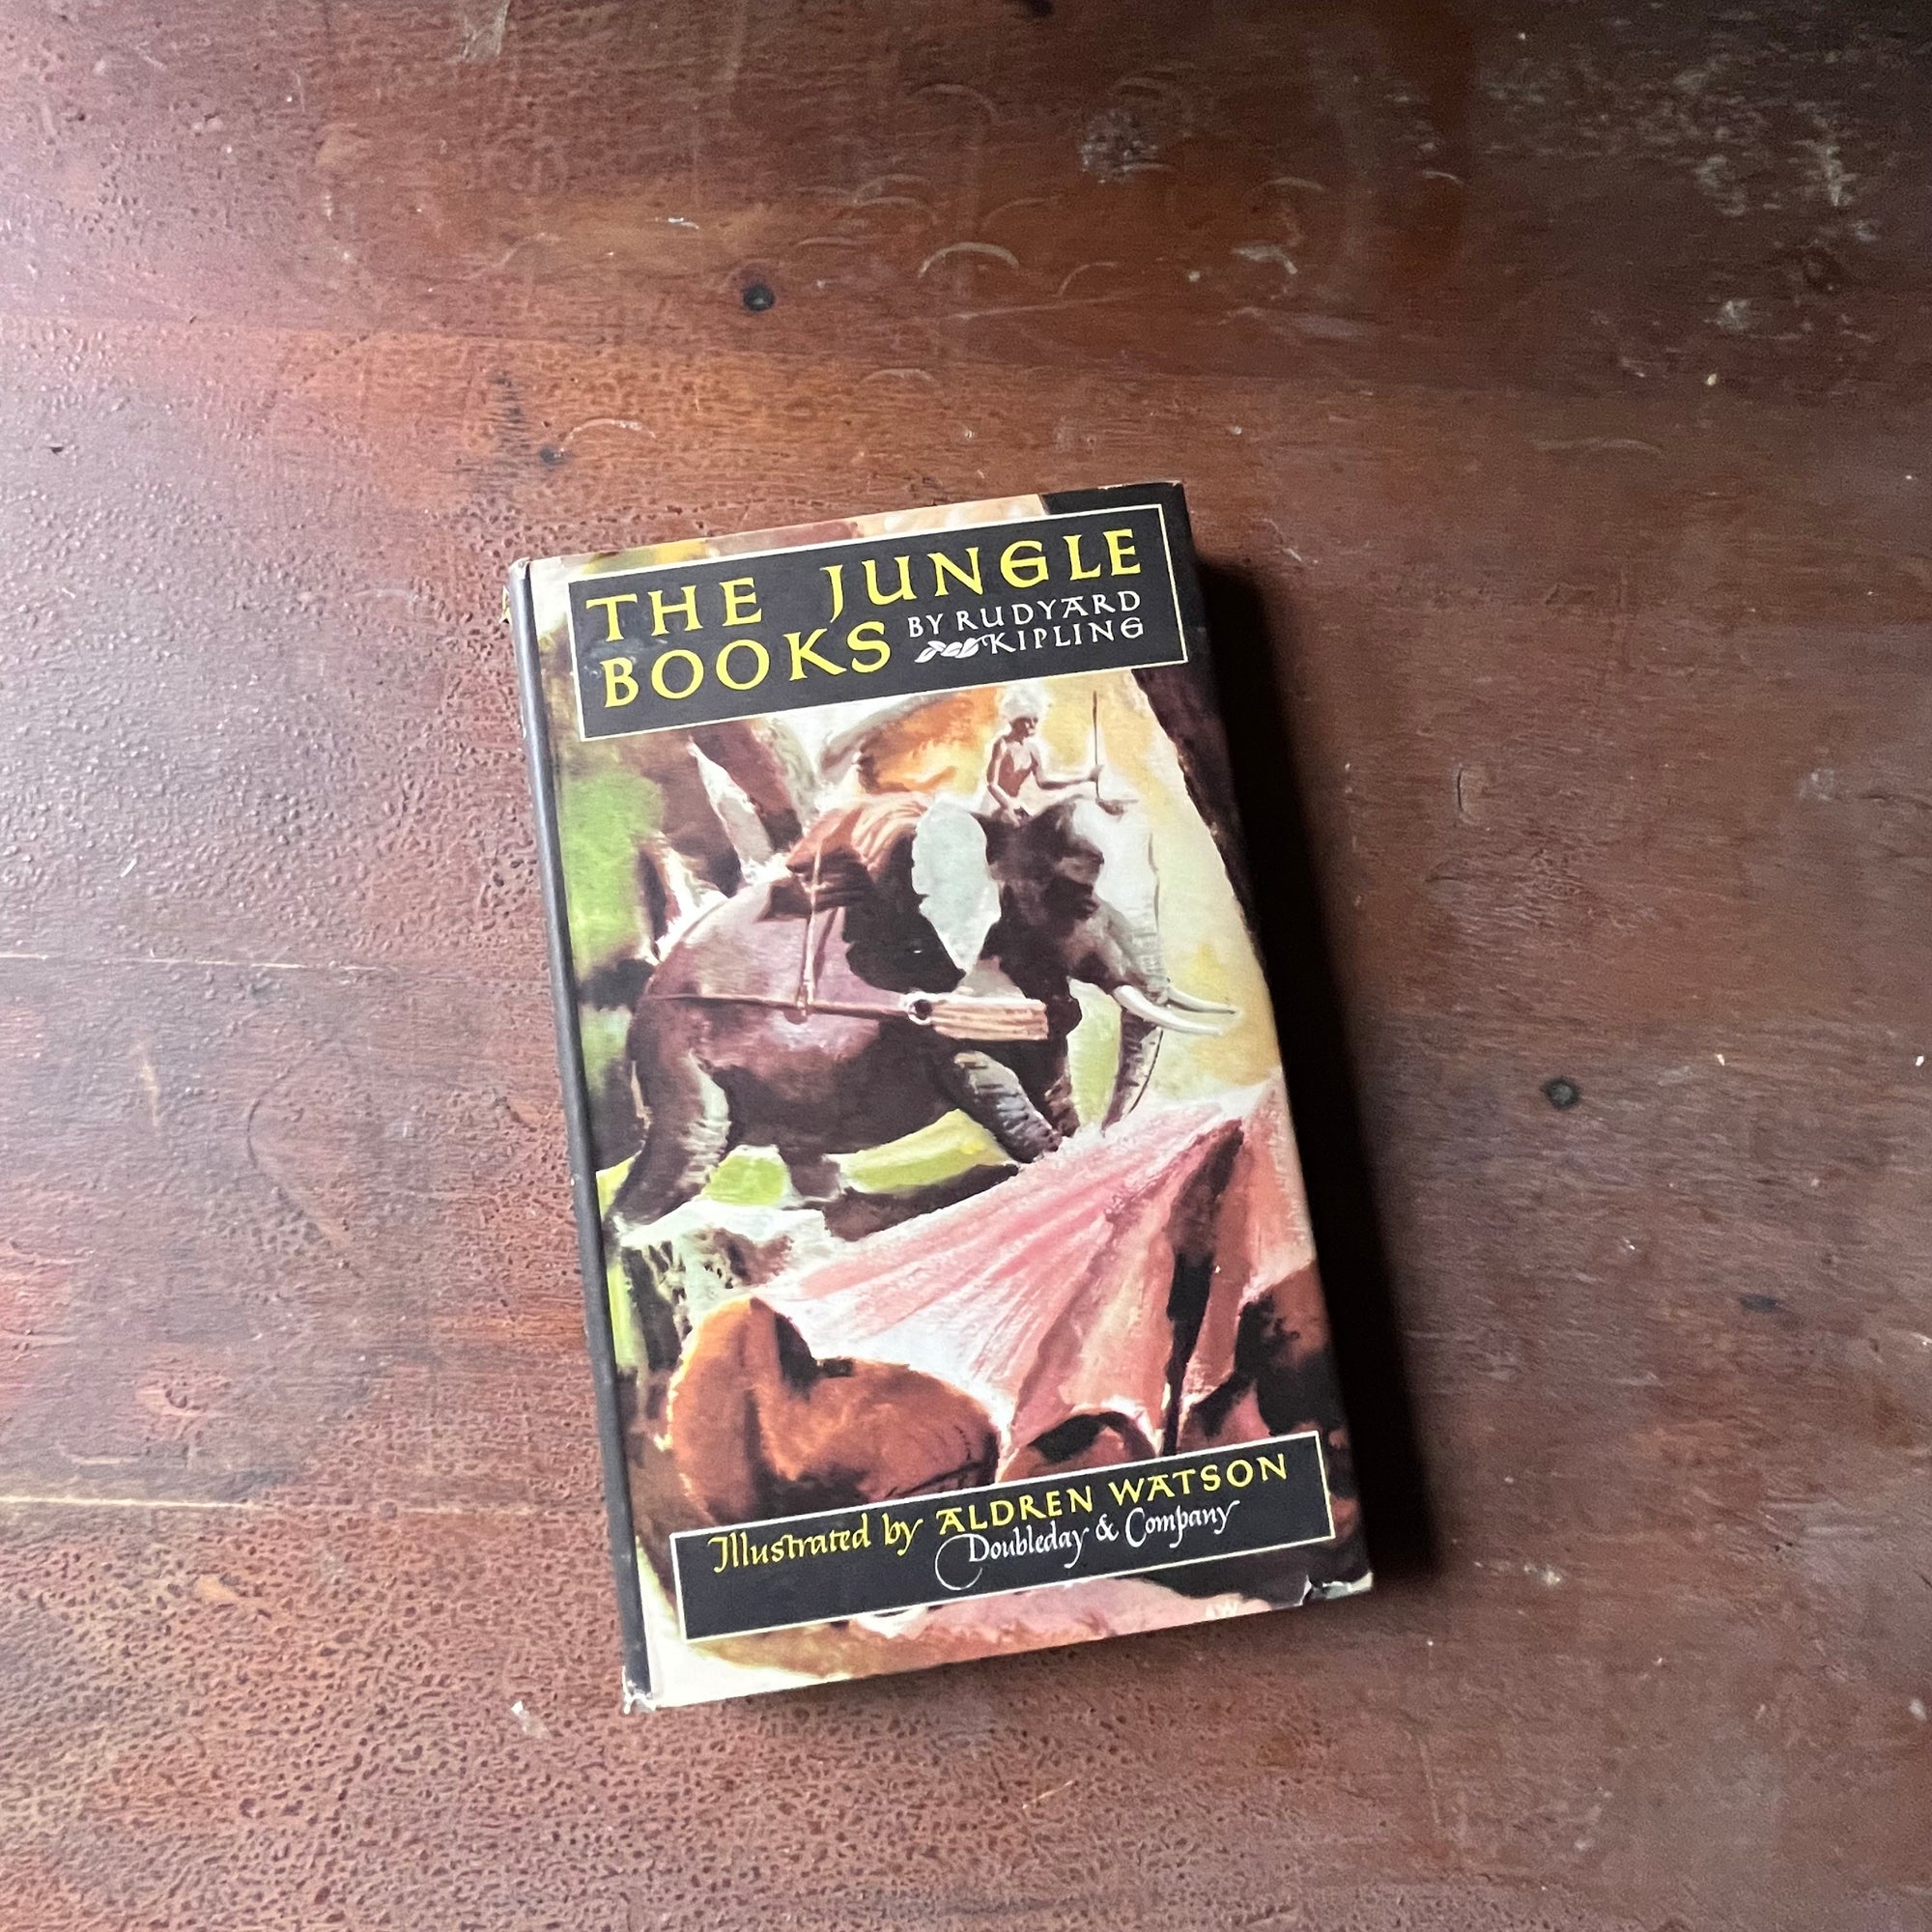 The jungle Books by Rudyard Kipling - Volume 2 - view of the dust jacket's front cover